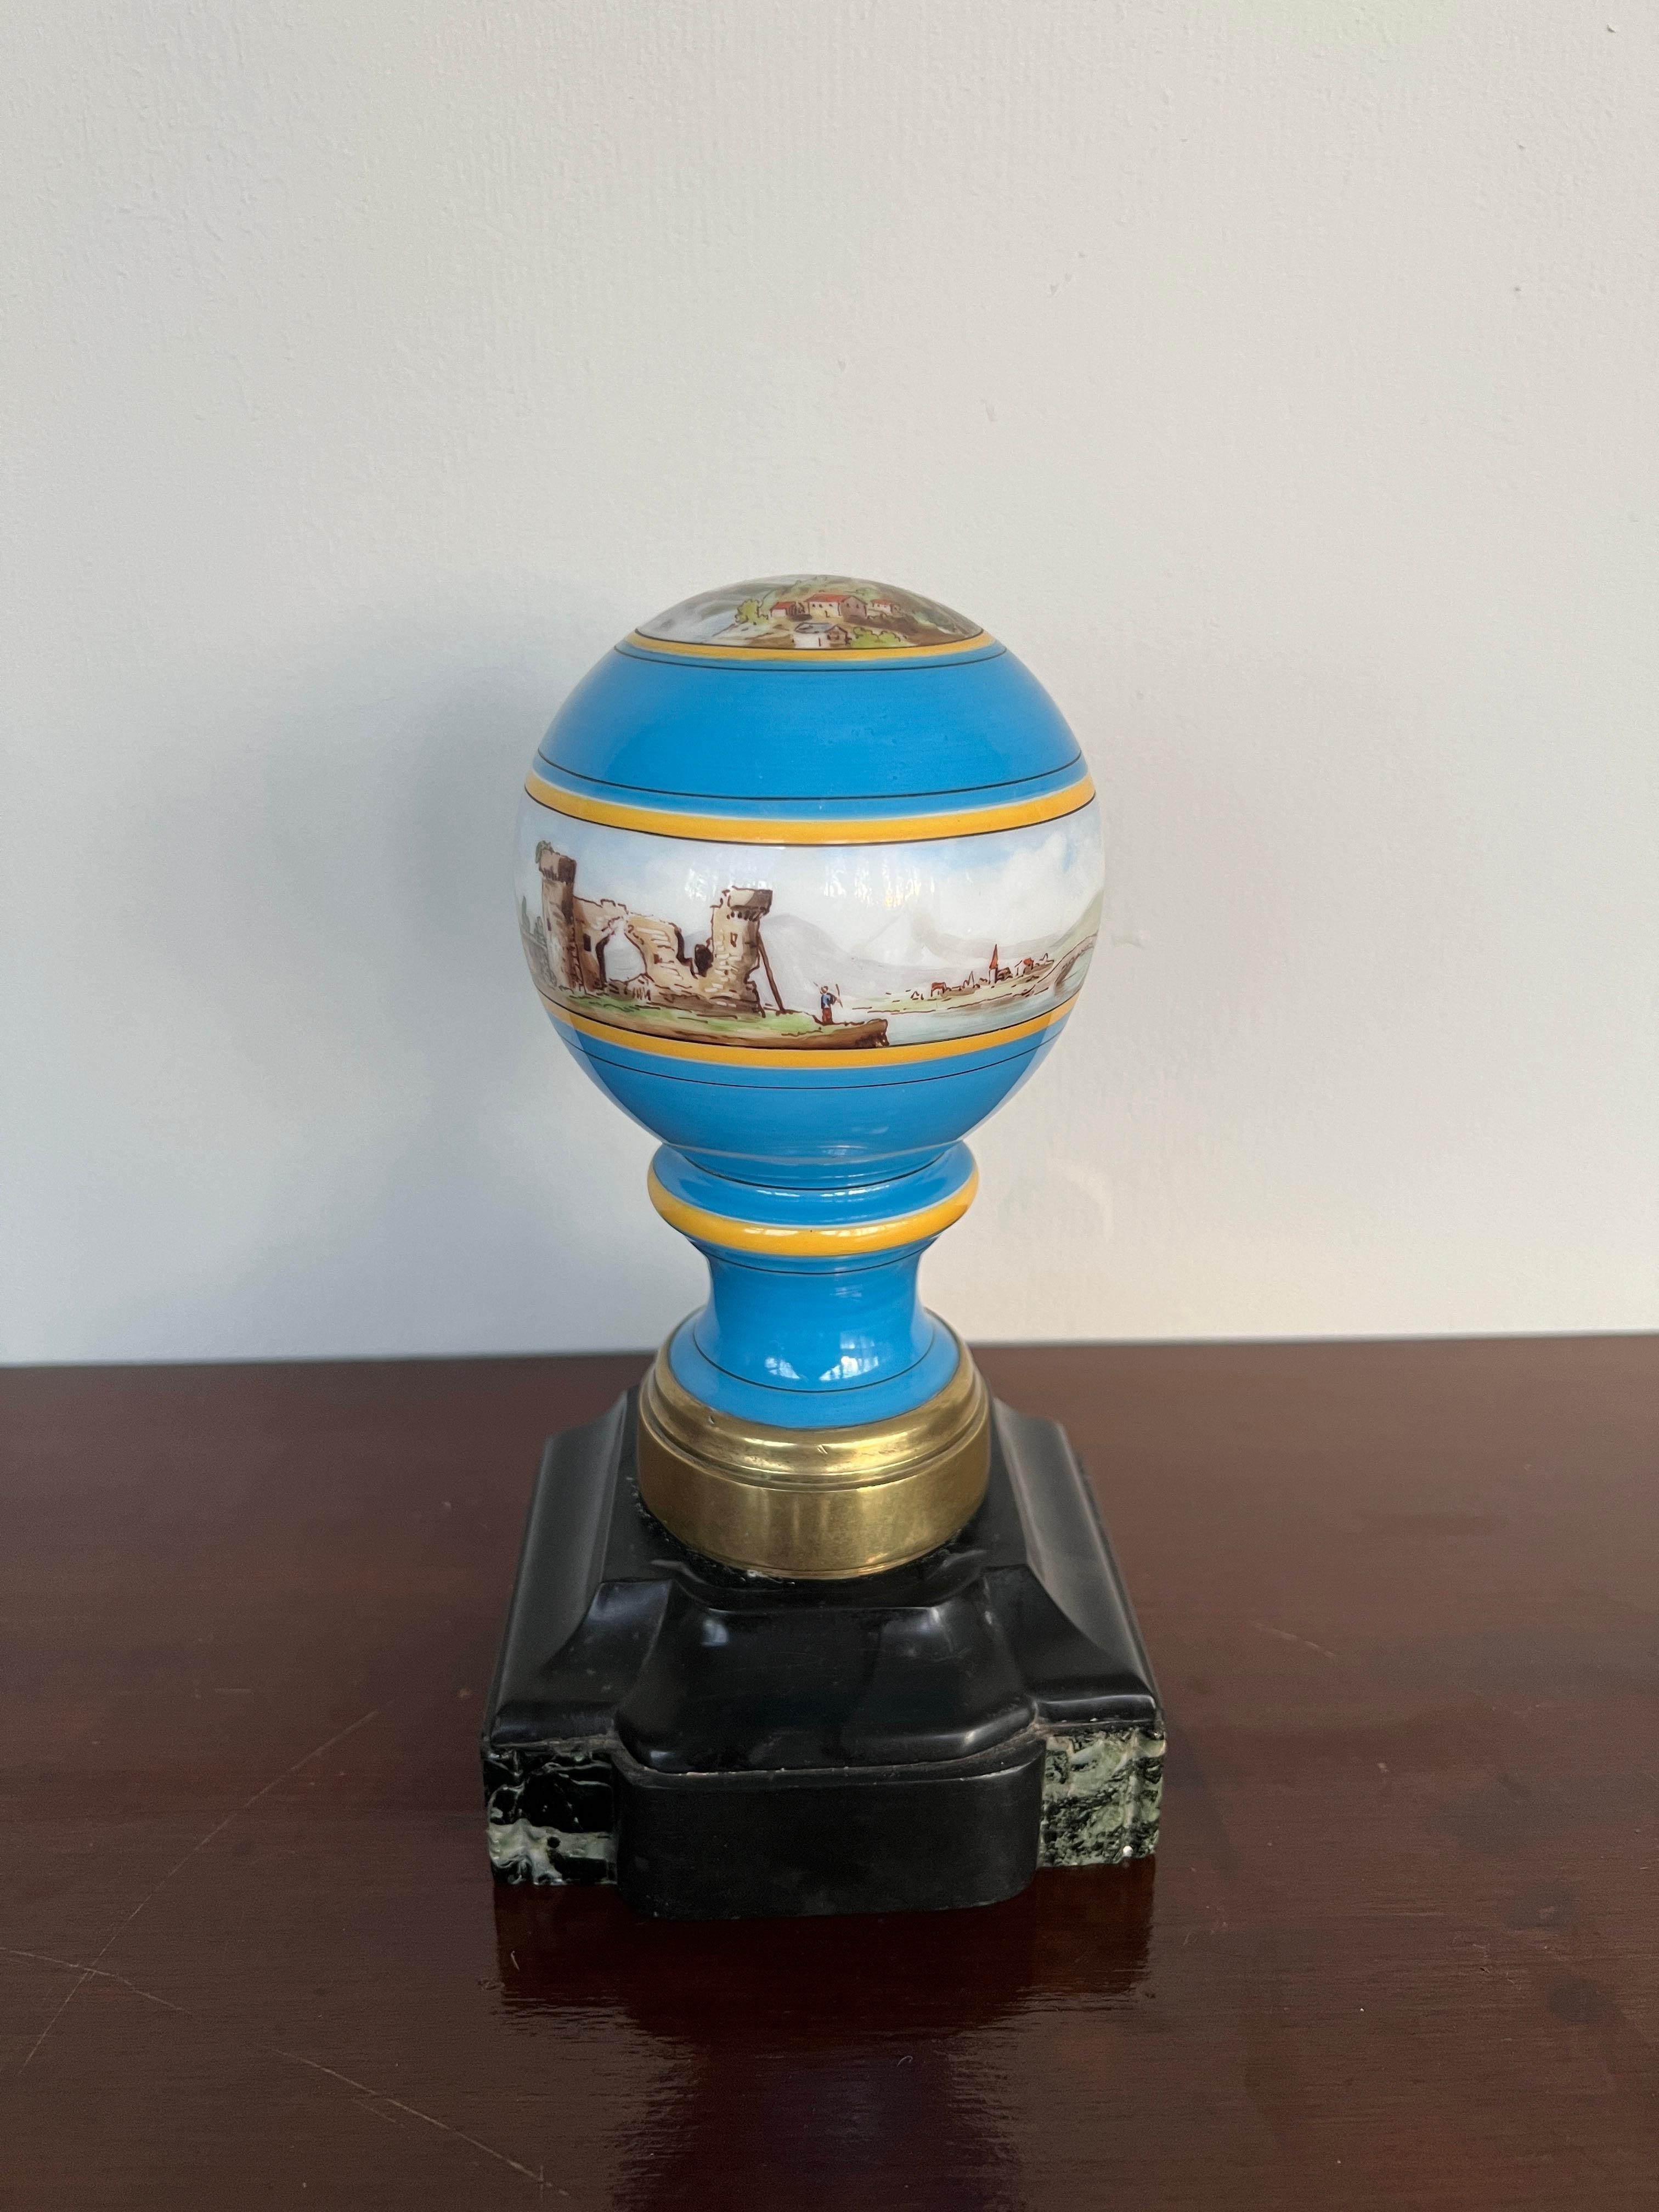 French, late 19th to early 20th century.

An antique Grand Tour era newel post finial in blue opaline with a hand painted scenic view to the top and exterior. The bottom has a bronze base cap and mounted to a piece of black marble. 
Note: The marble